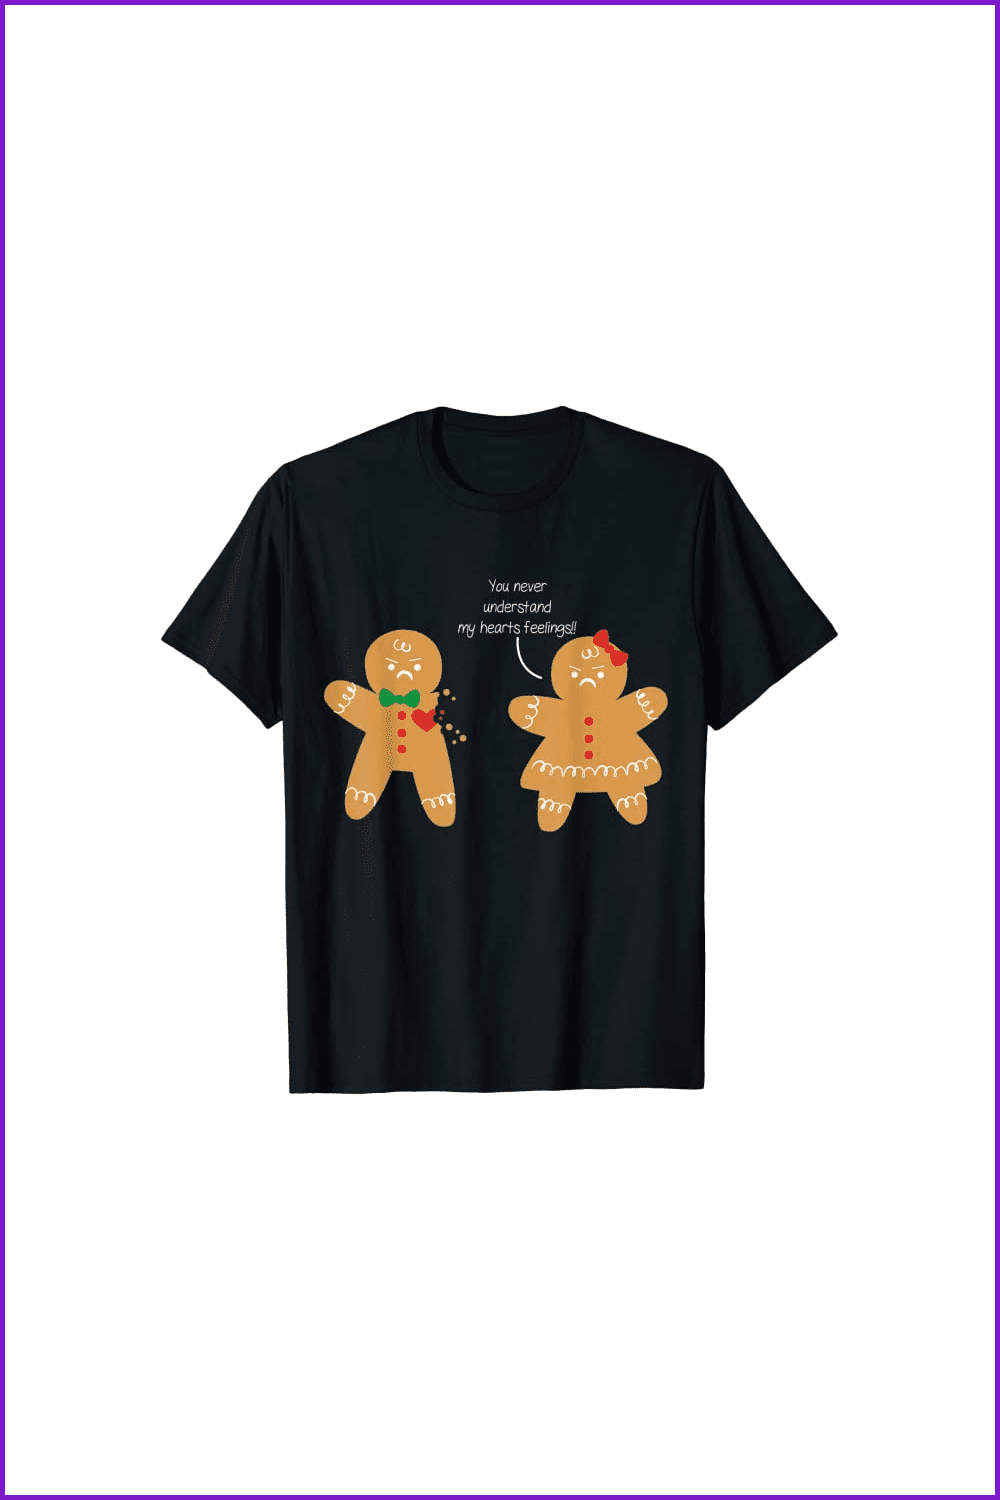 Black t-shirt with sniping a couple of gingerbreads.